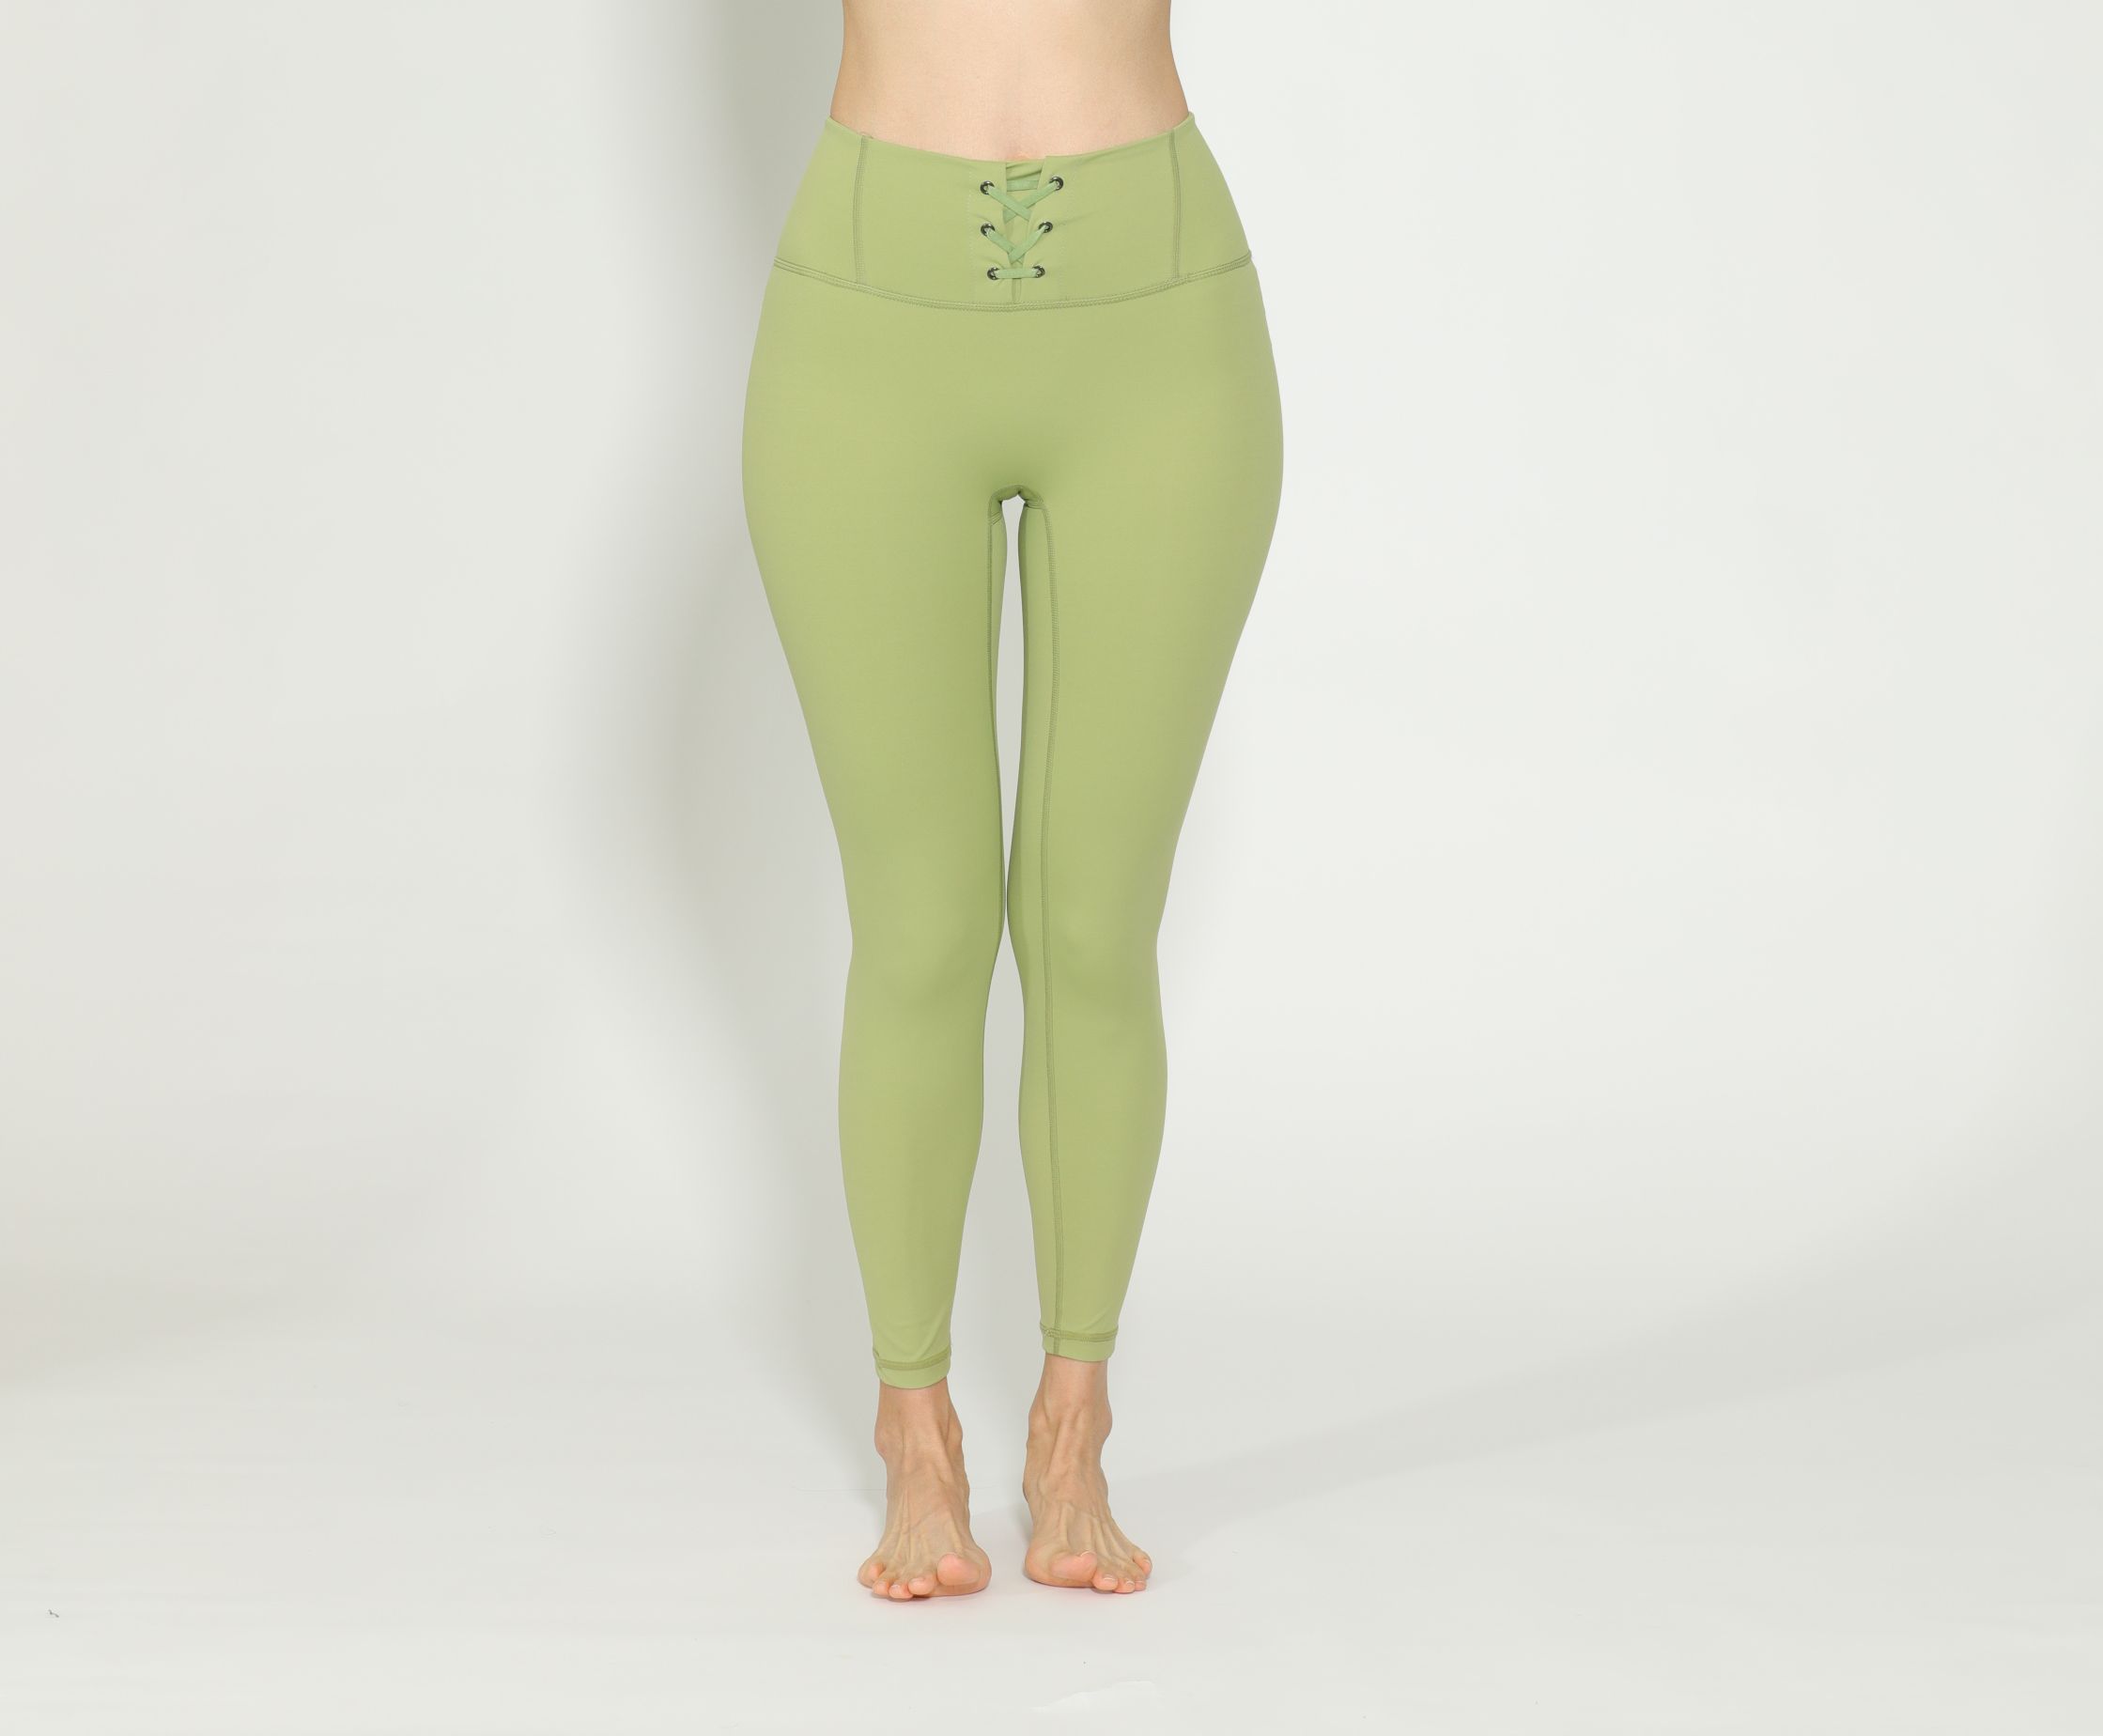 Pine Green Color Legging Ankle Length – LGM Fashions